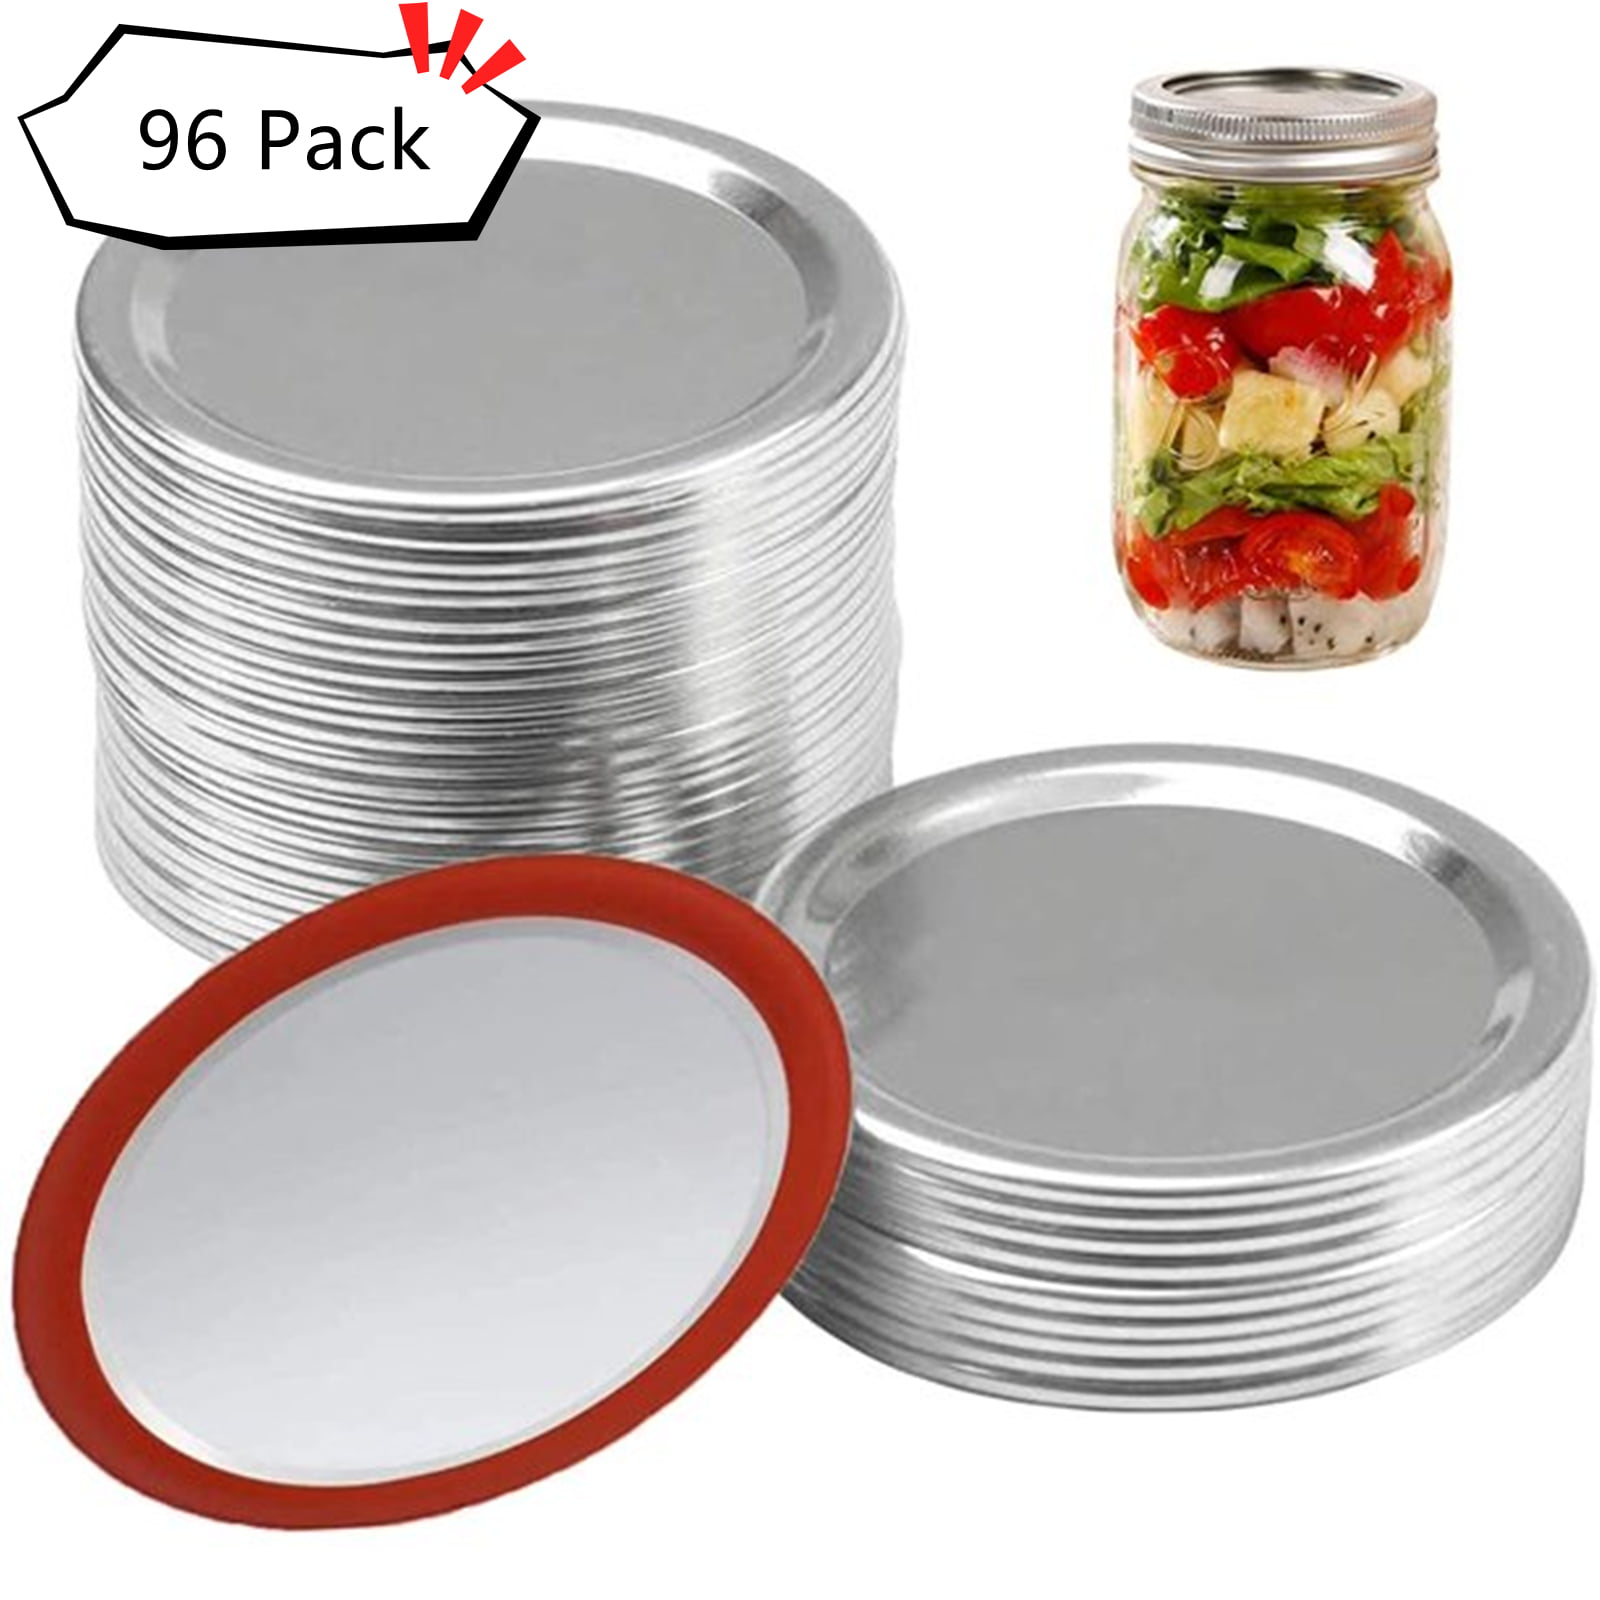 Canning Lids Mason Jar Lids And Bands With Regular Mouth Stainless Steel Lids Leak-Proof And Secure Canning Storage Caps 